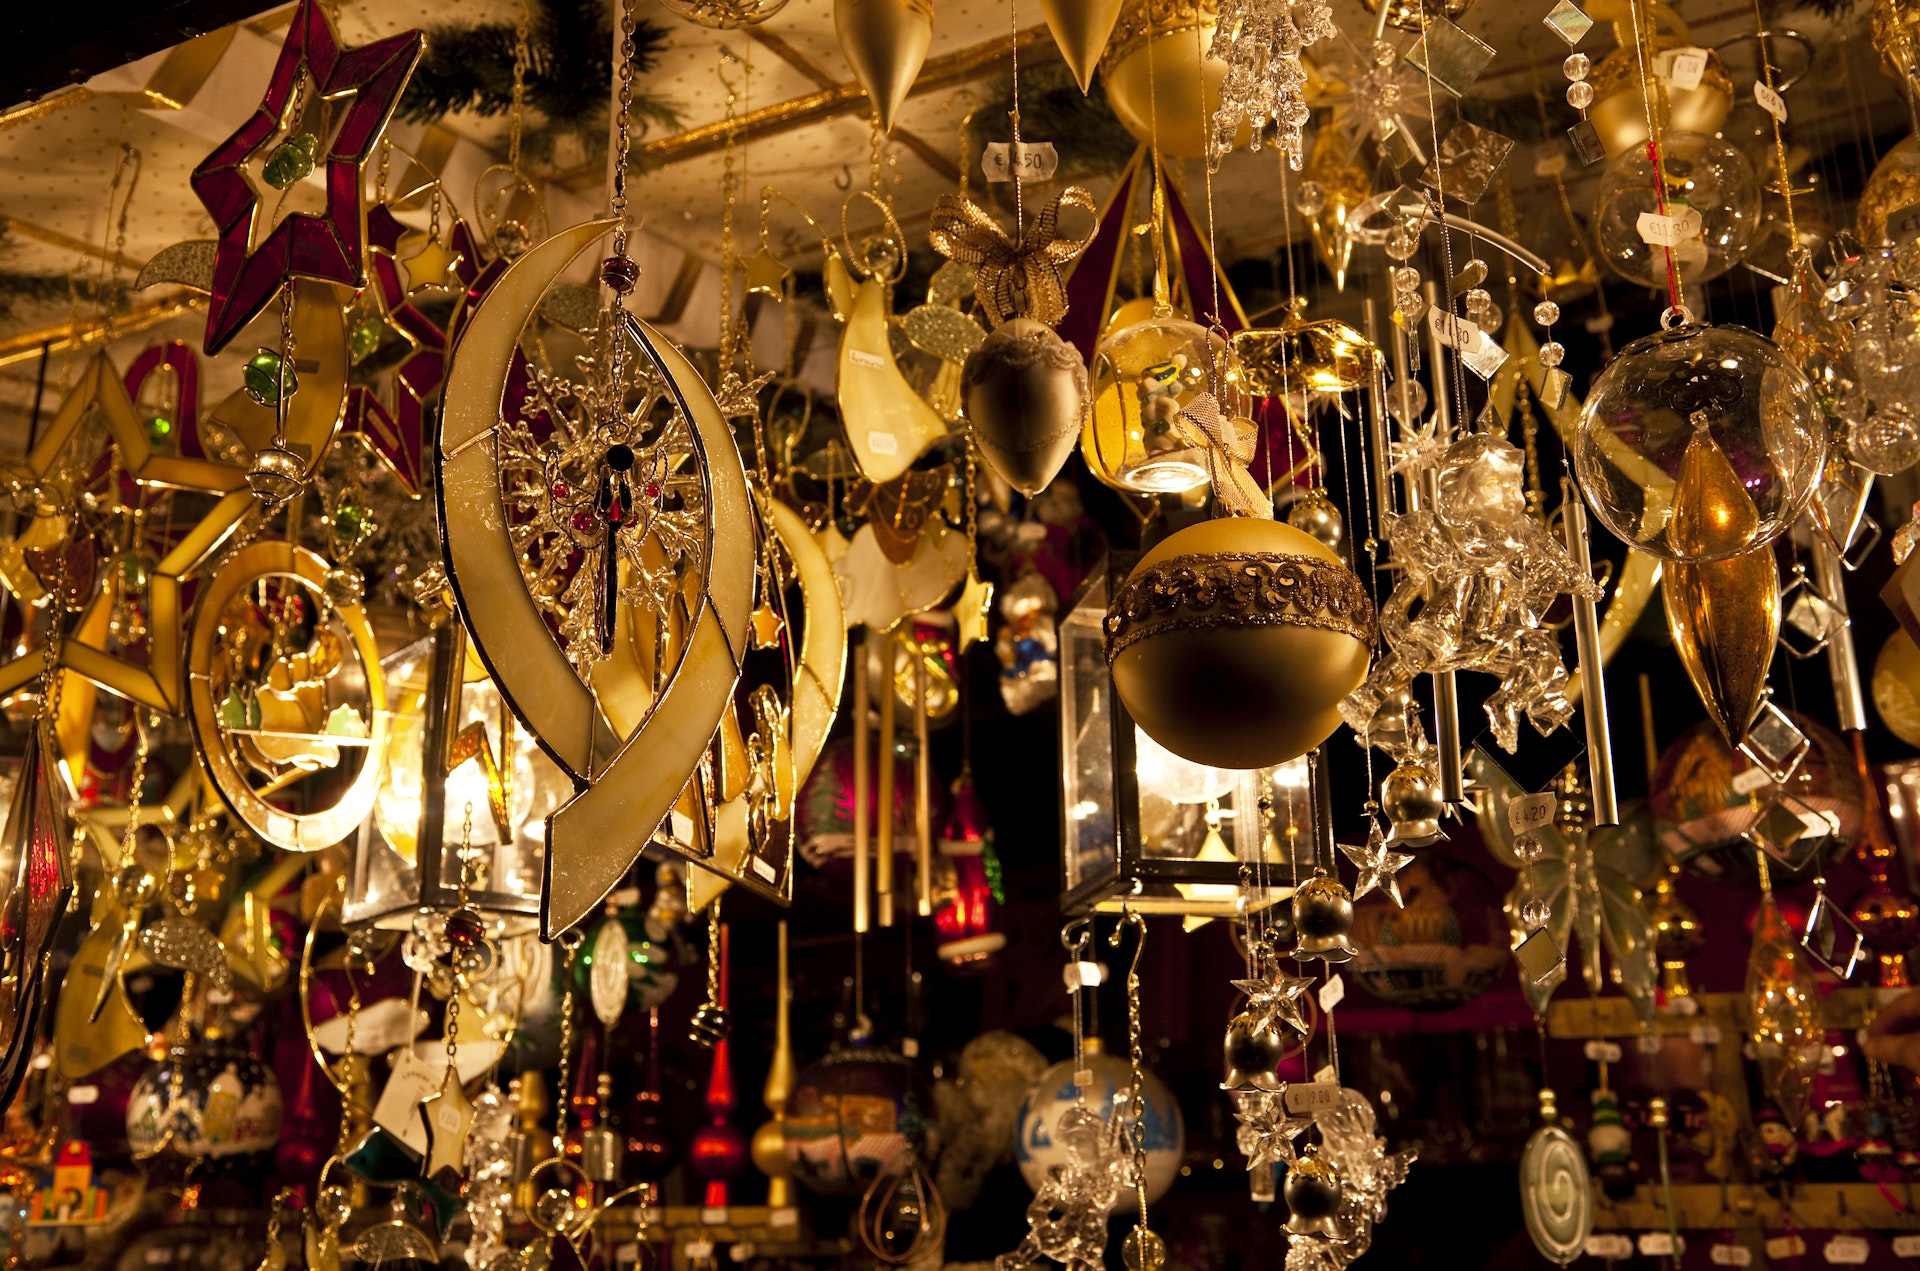 Golden glass and crystal Christmas ornaments on sale at Christmas market